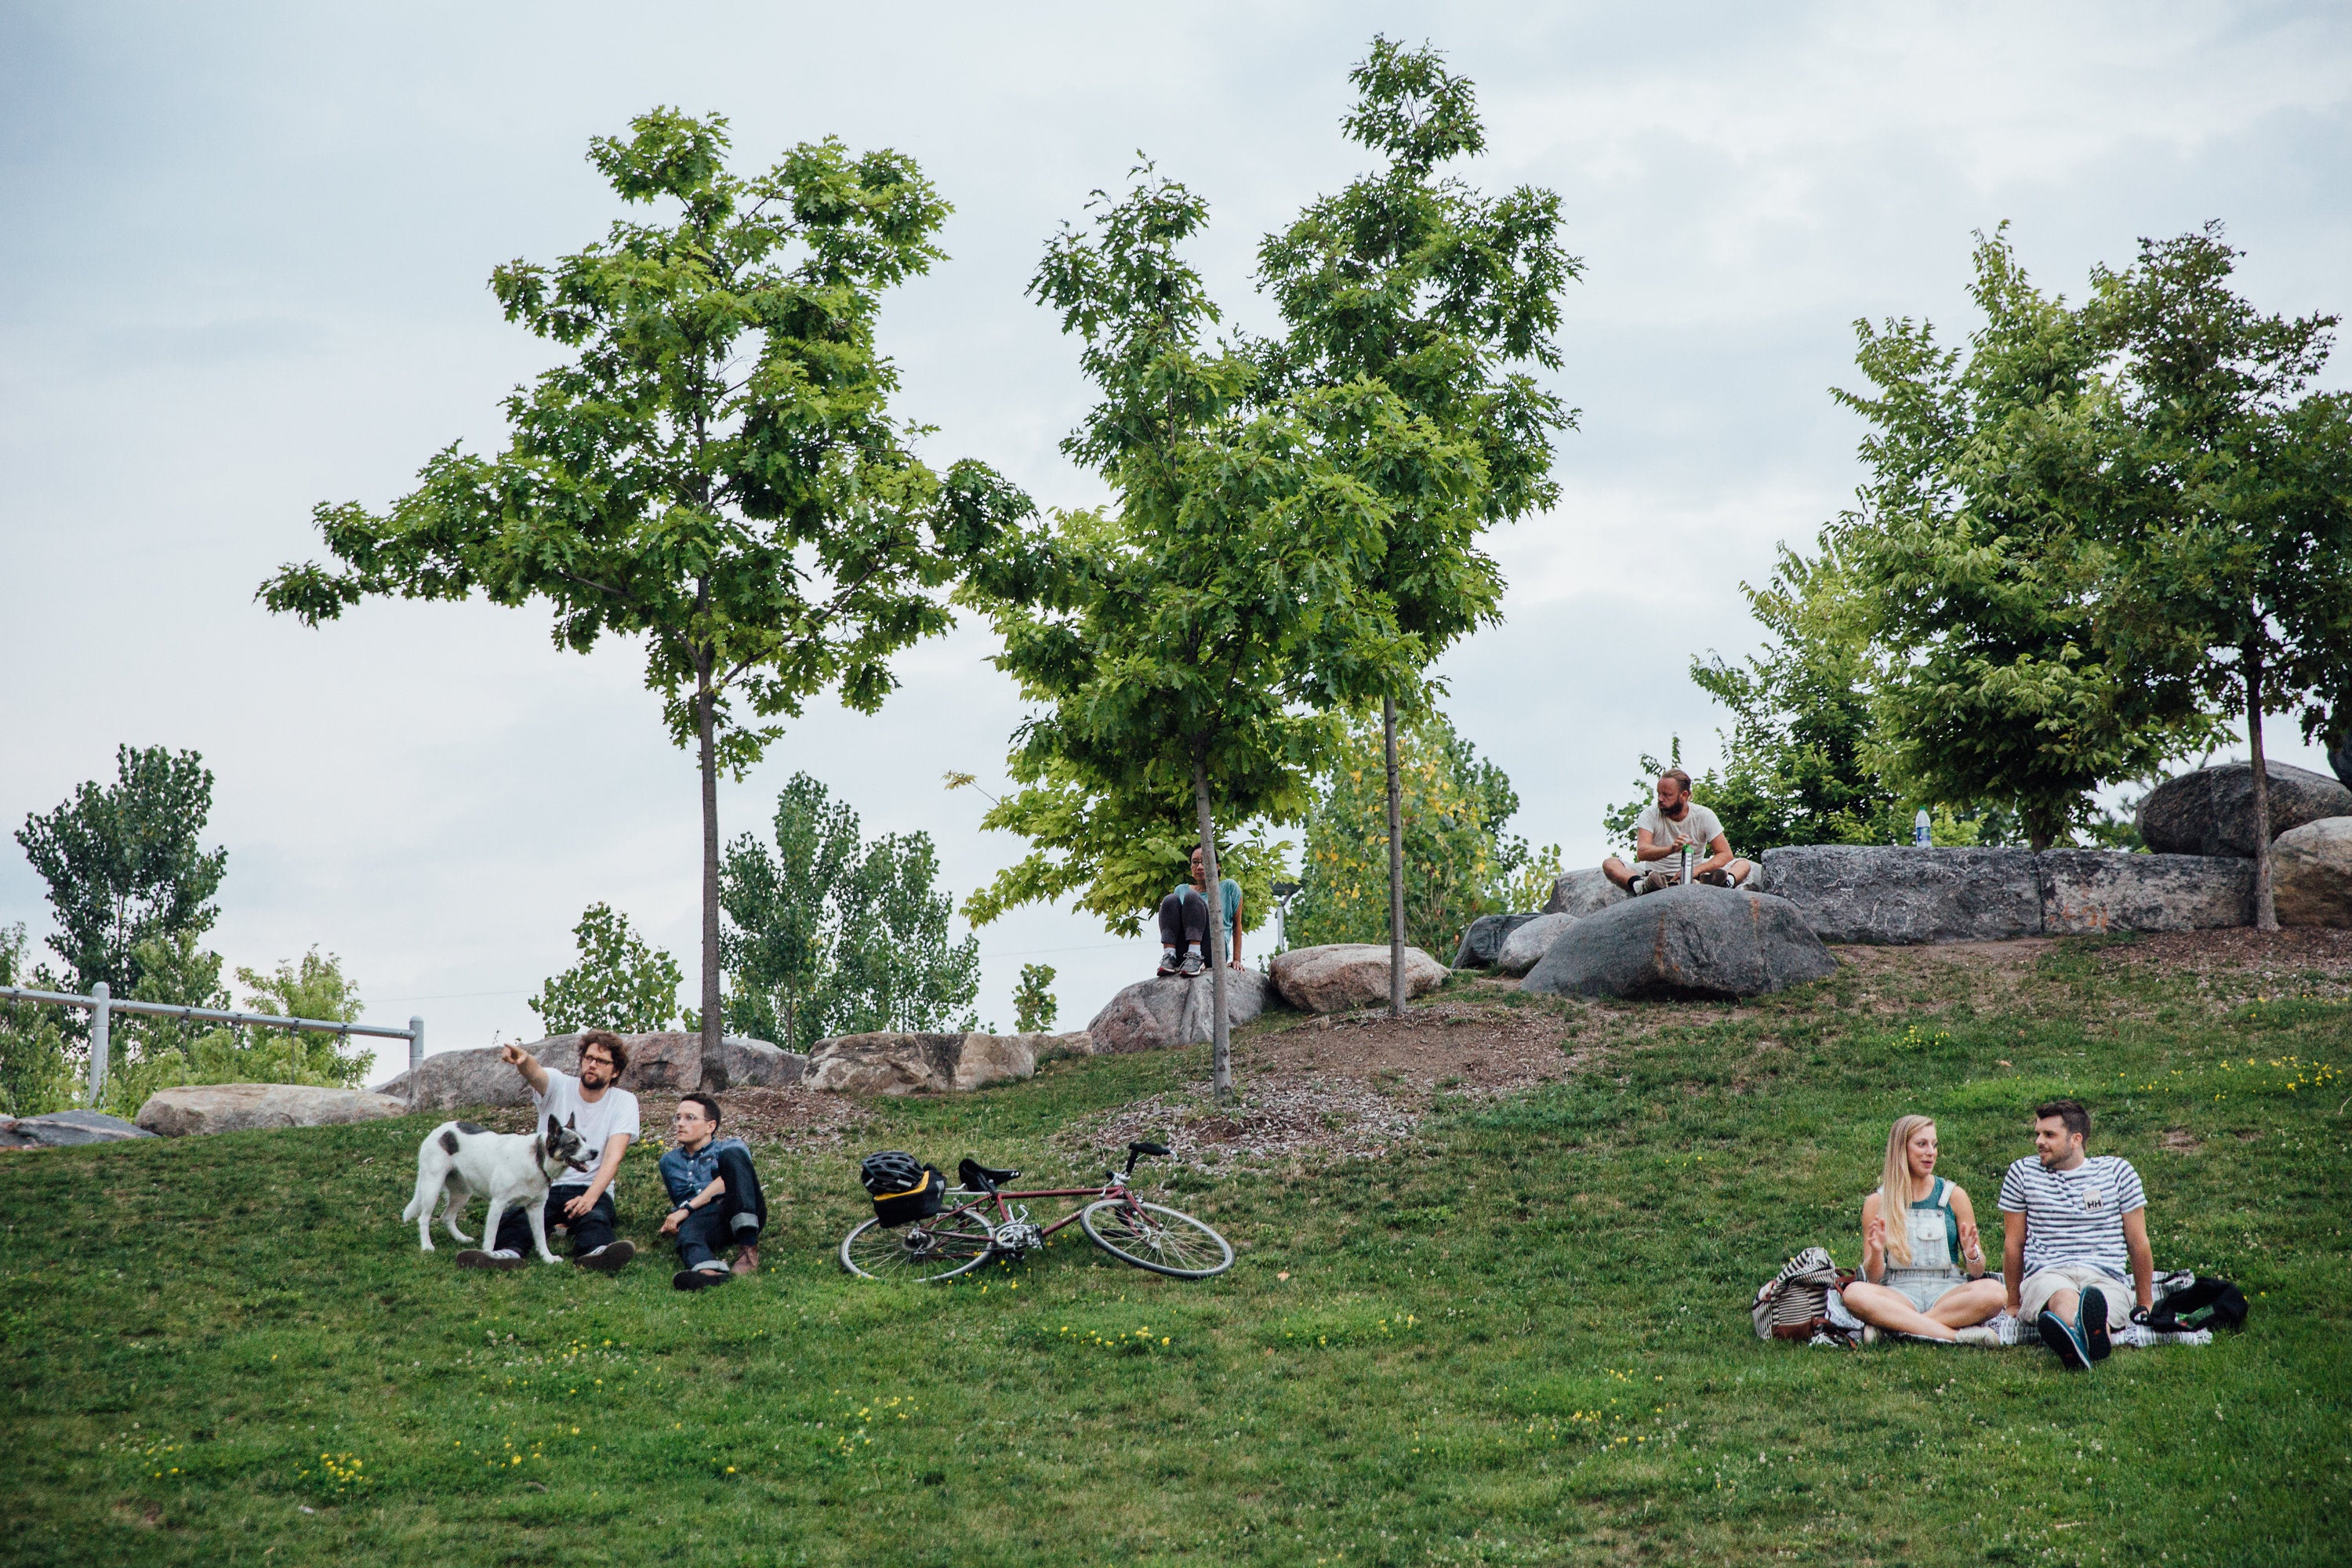 Park-goers sitting on the gently sloping hill of the south lawn at Corktown Common.